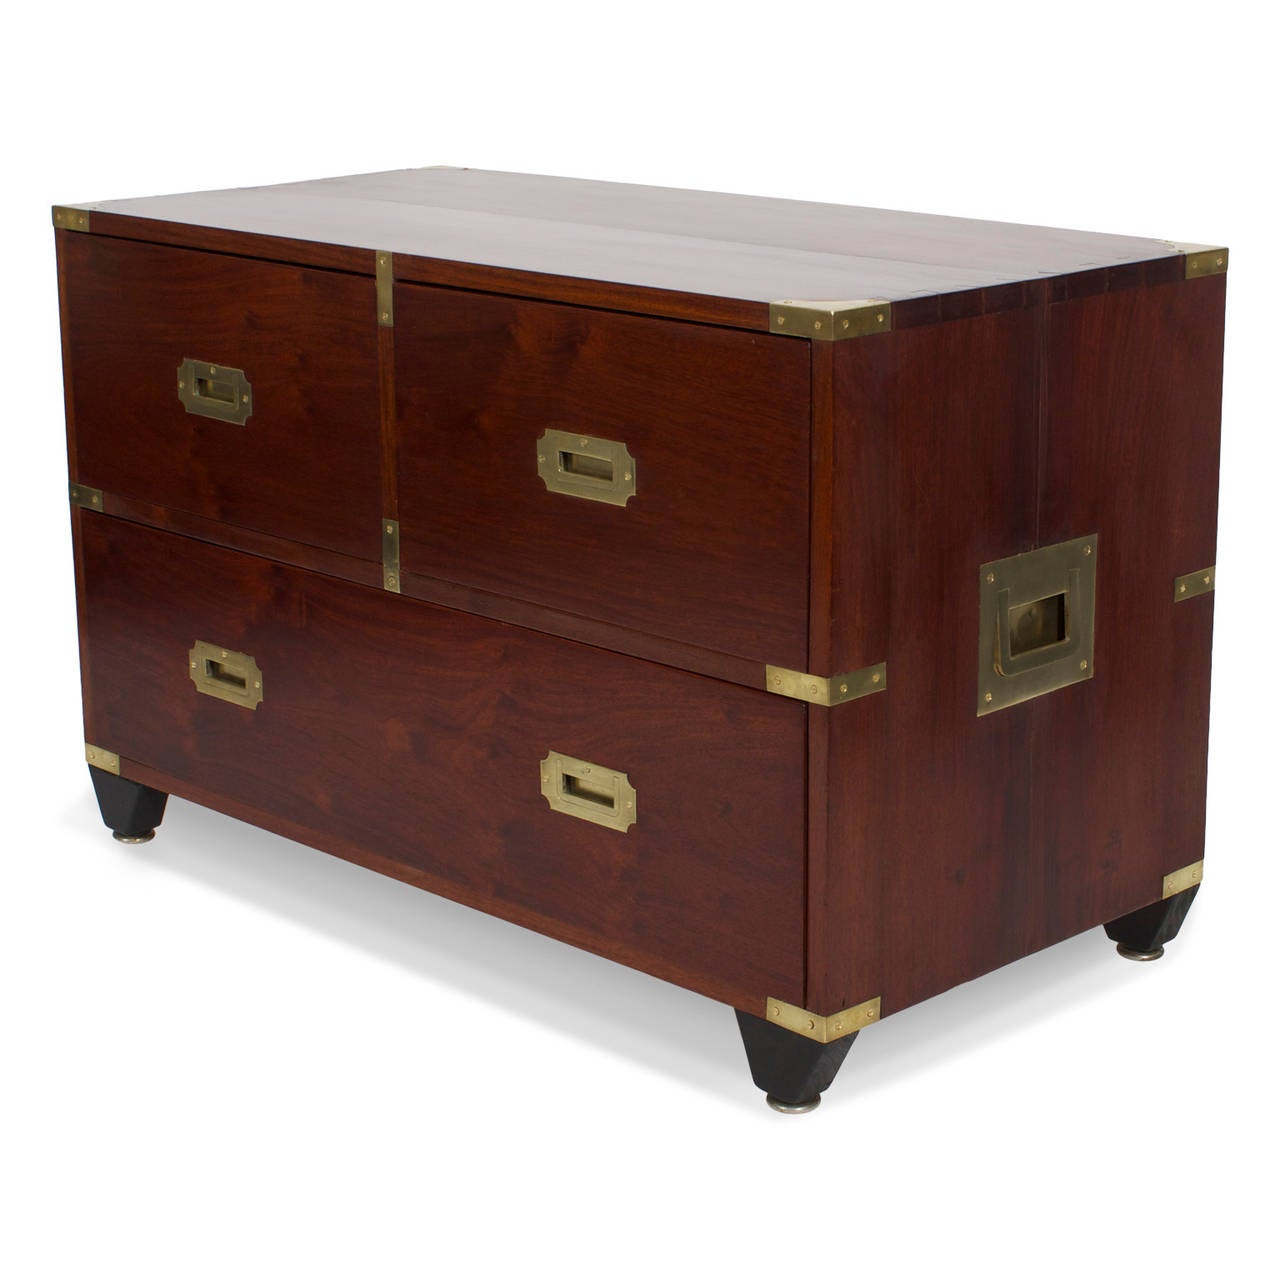 Hong Kong Pair of Labeled Charlotte Horstmann Campaign Style Chests